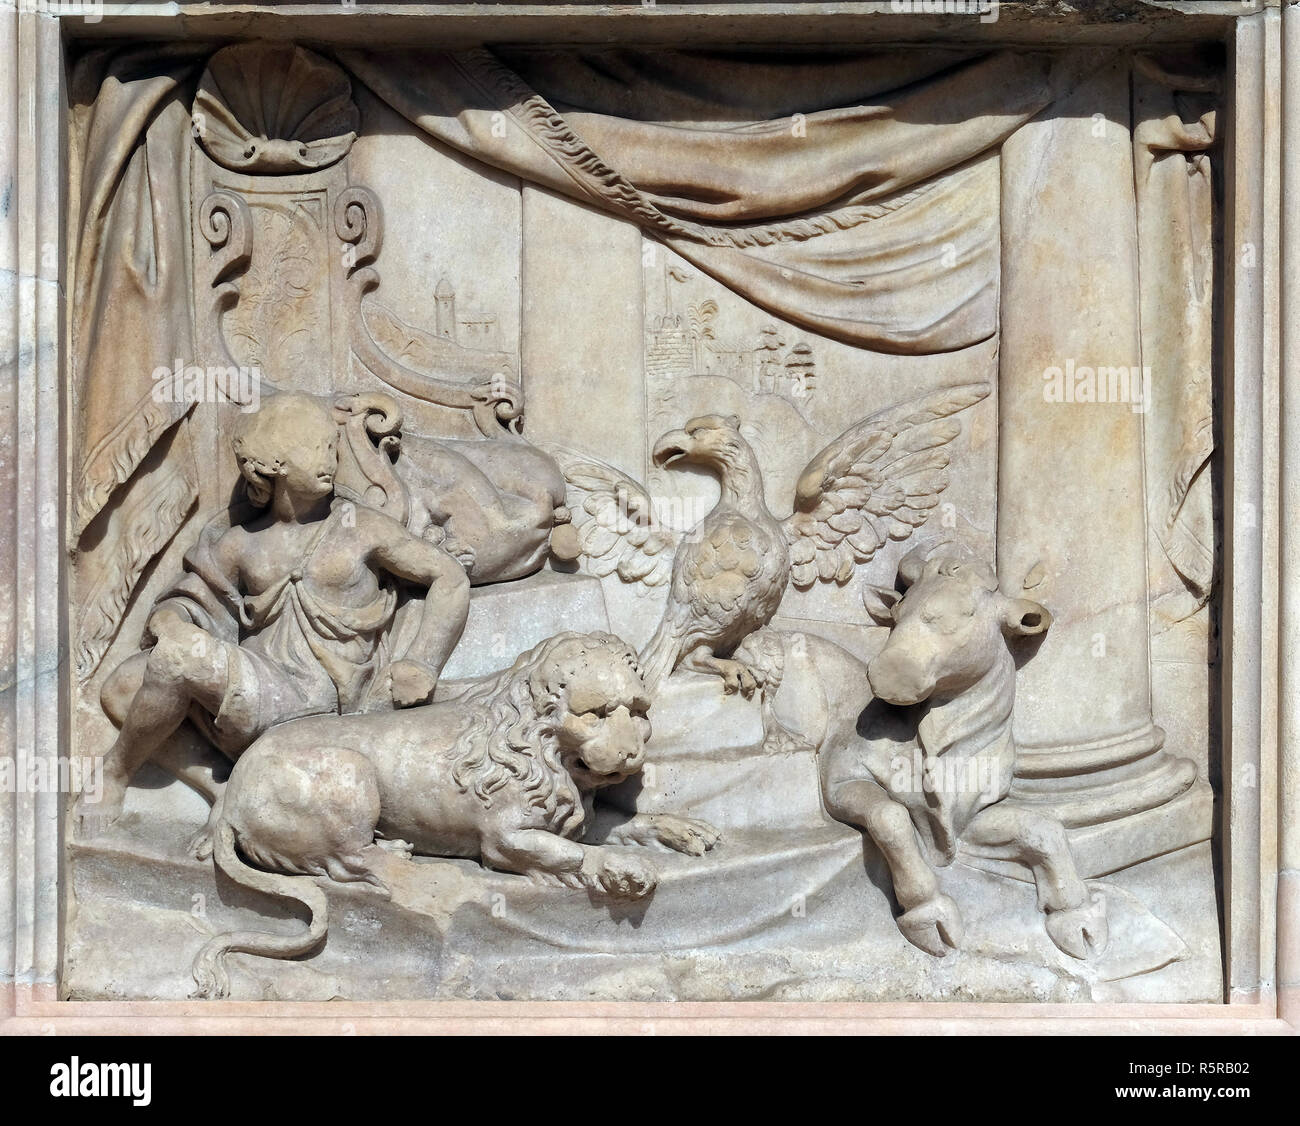 Throne of God and Four Living Creatures, marble relief on the facade of the Milan Cathedral, Duomo di Santa Maria Nascente, Milan, Lombardy, Italy Stock Photo